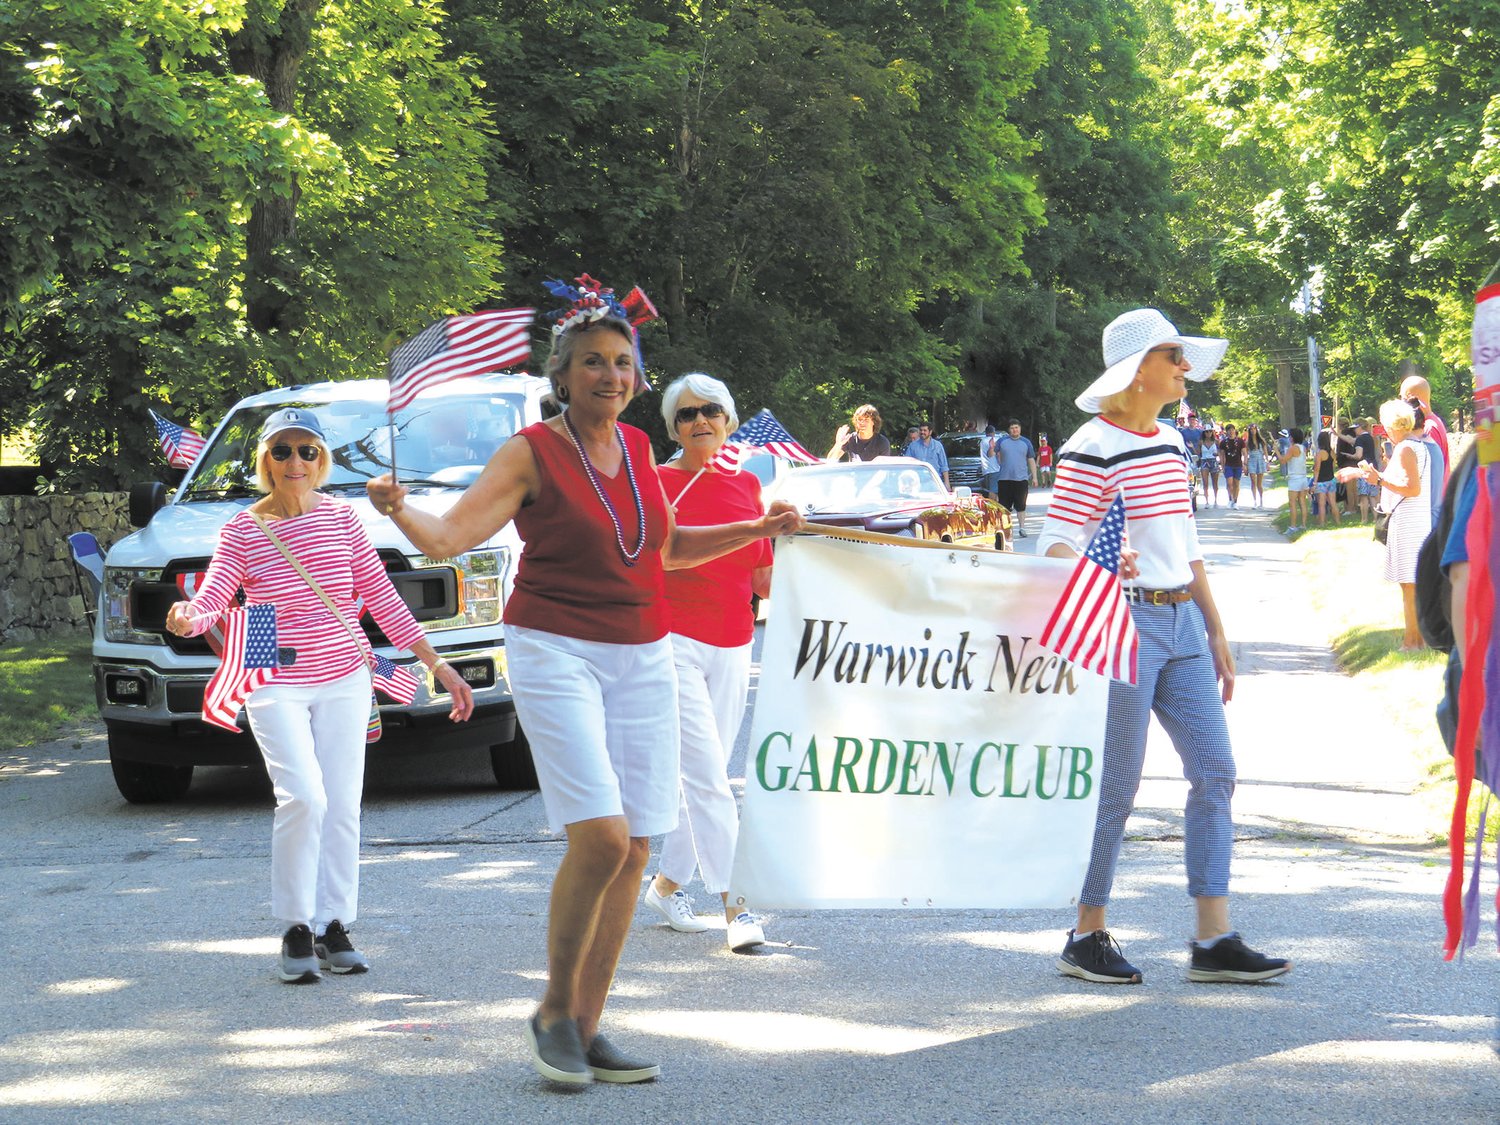 APPRECIATED BY MANY: Bernadine DiOrio and Ann Dougherty carry the Warwick Neck Garden Club banner. Among its projects the club maintains the garden entry to the Neck from West Shore Road.